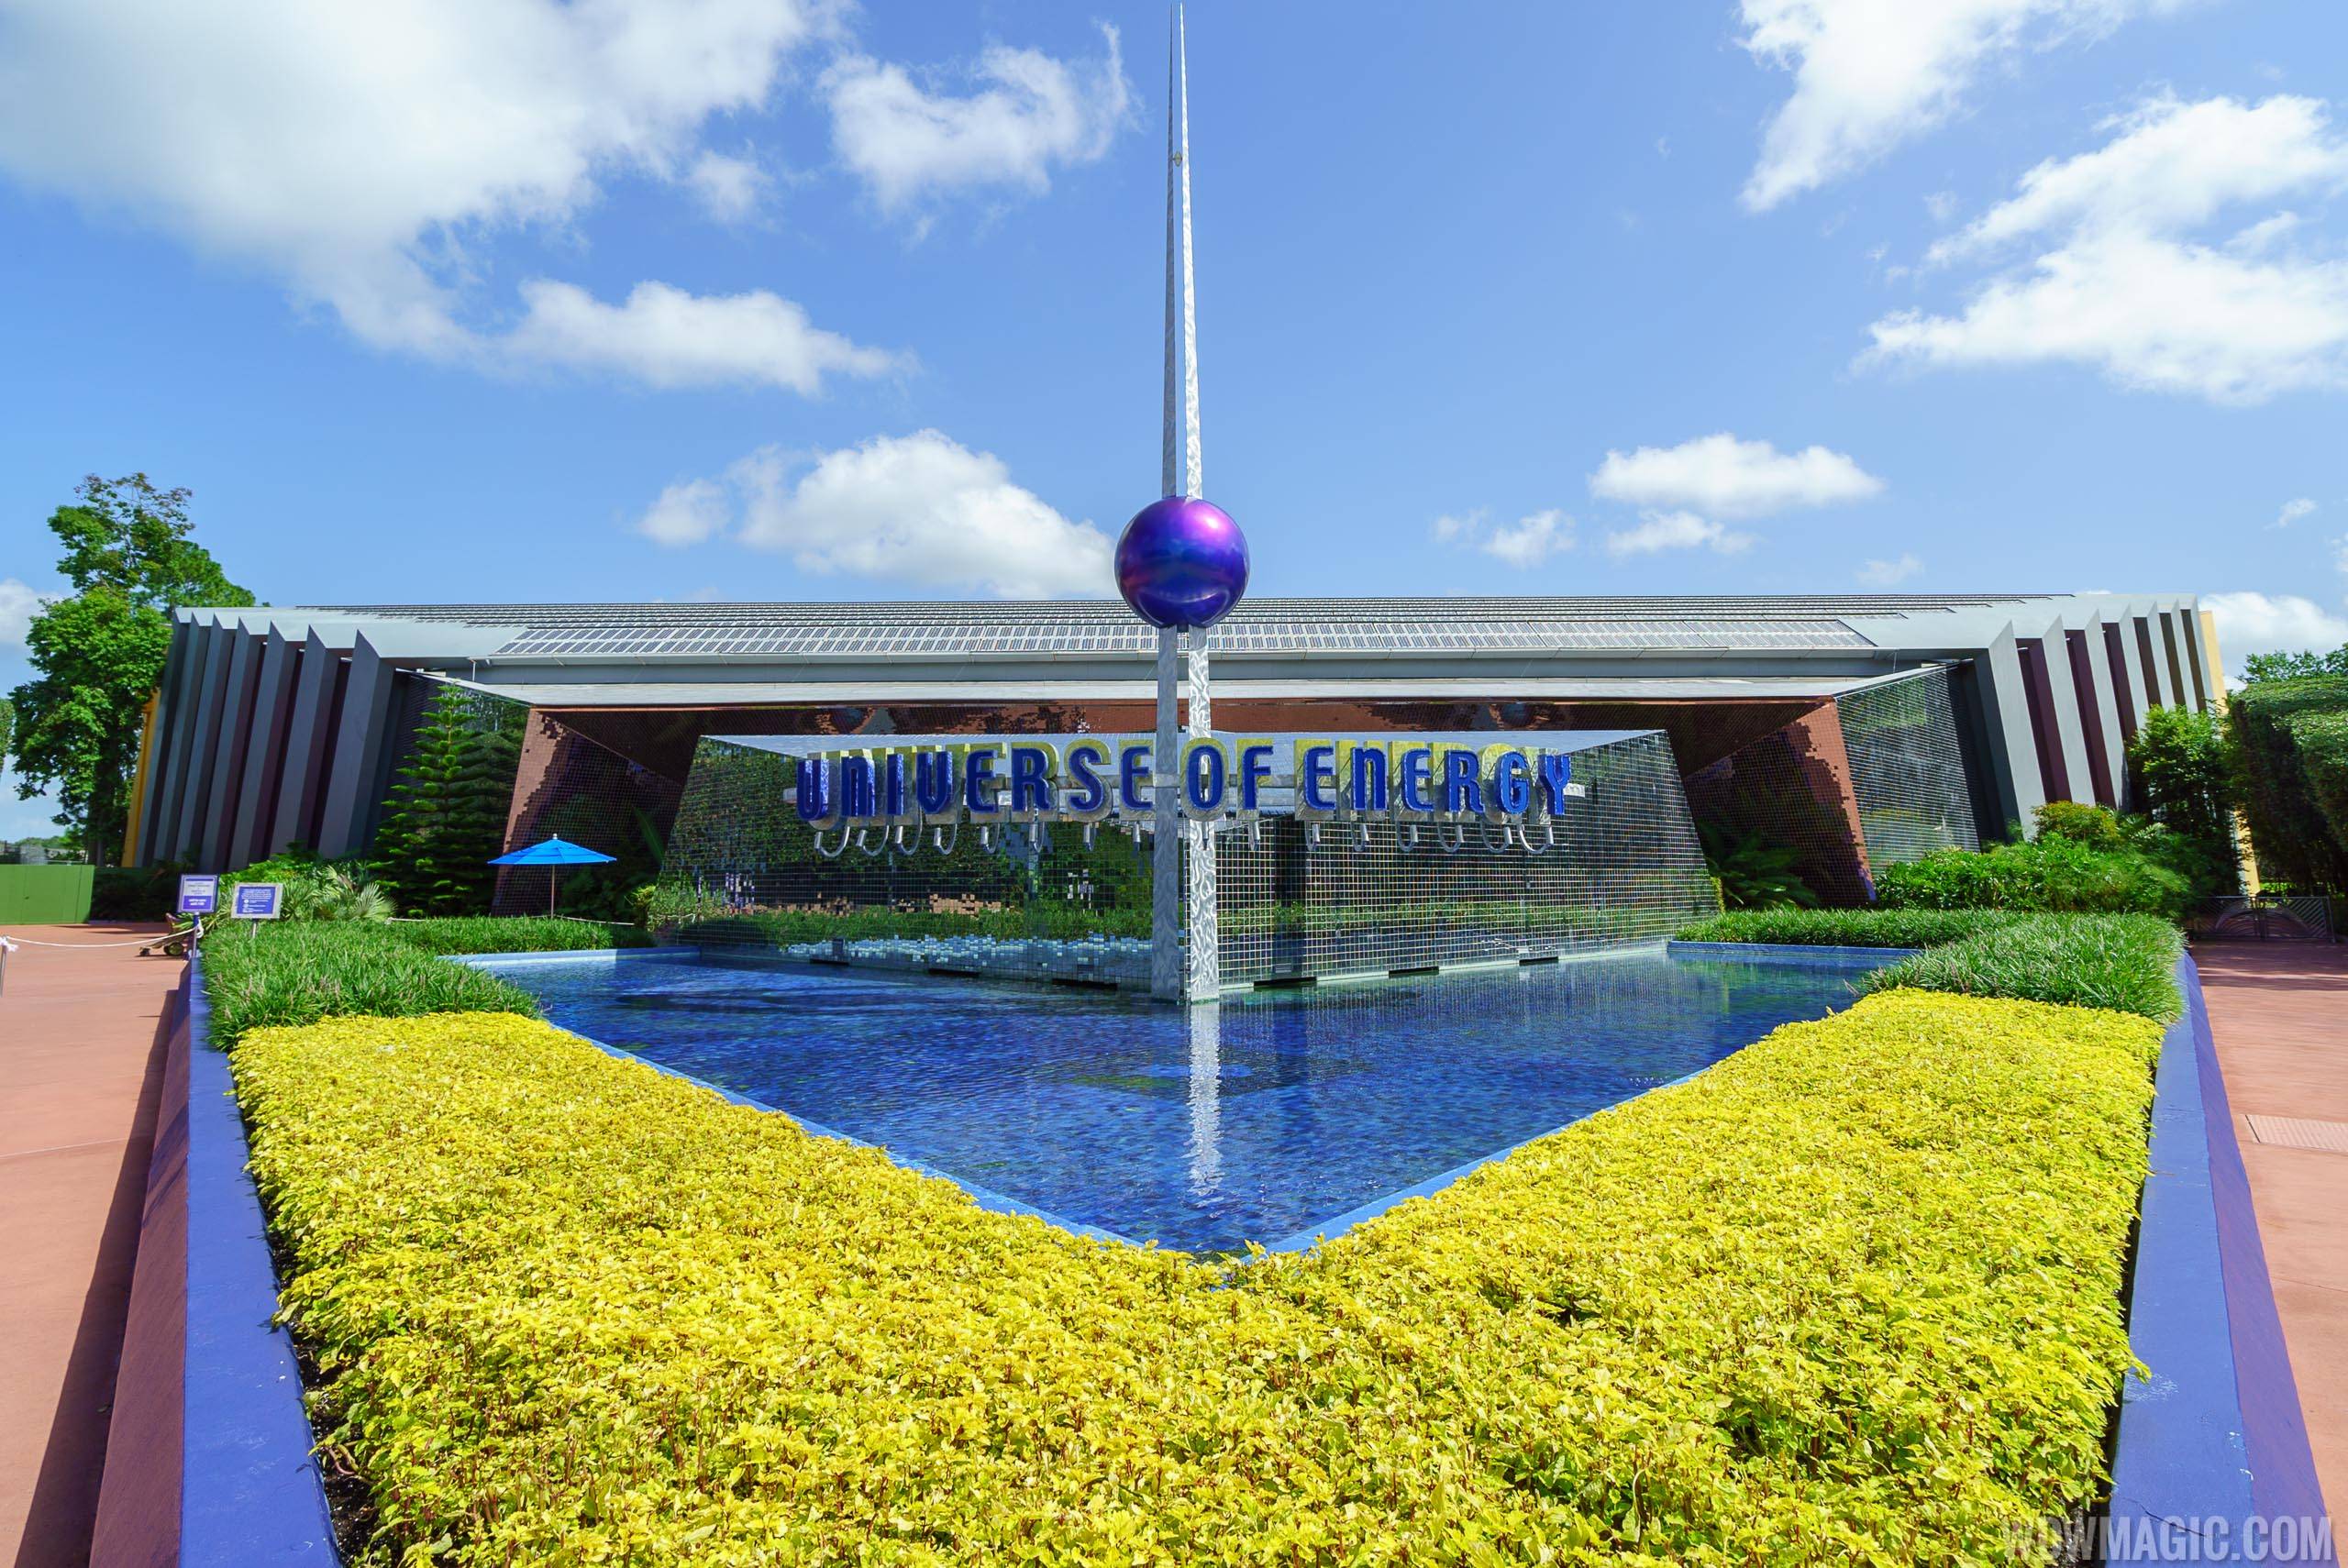 Universe of Energy exterior